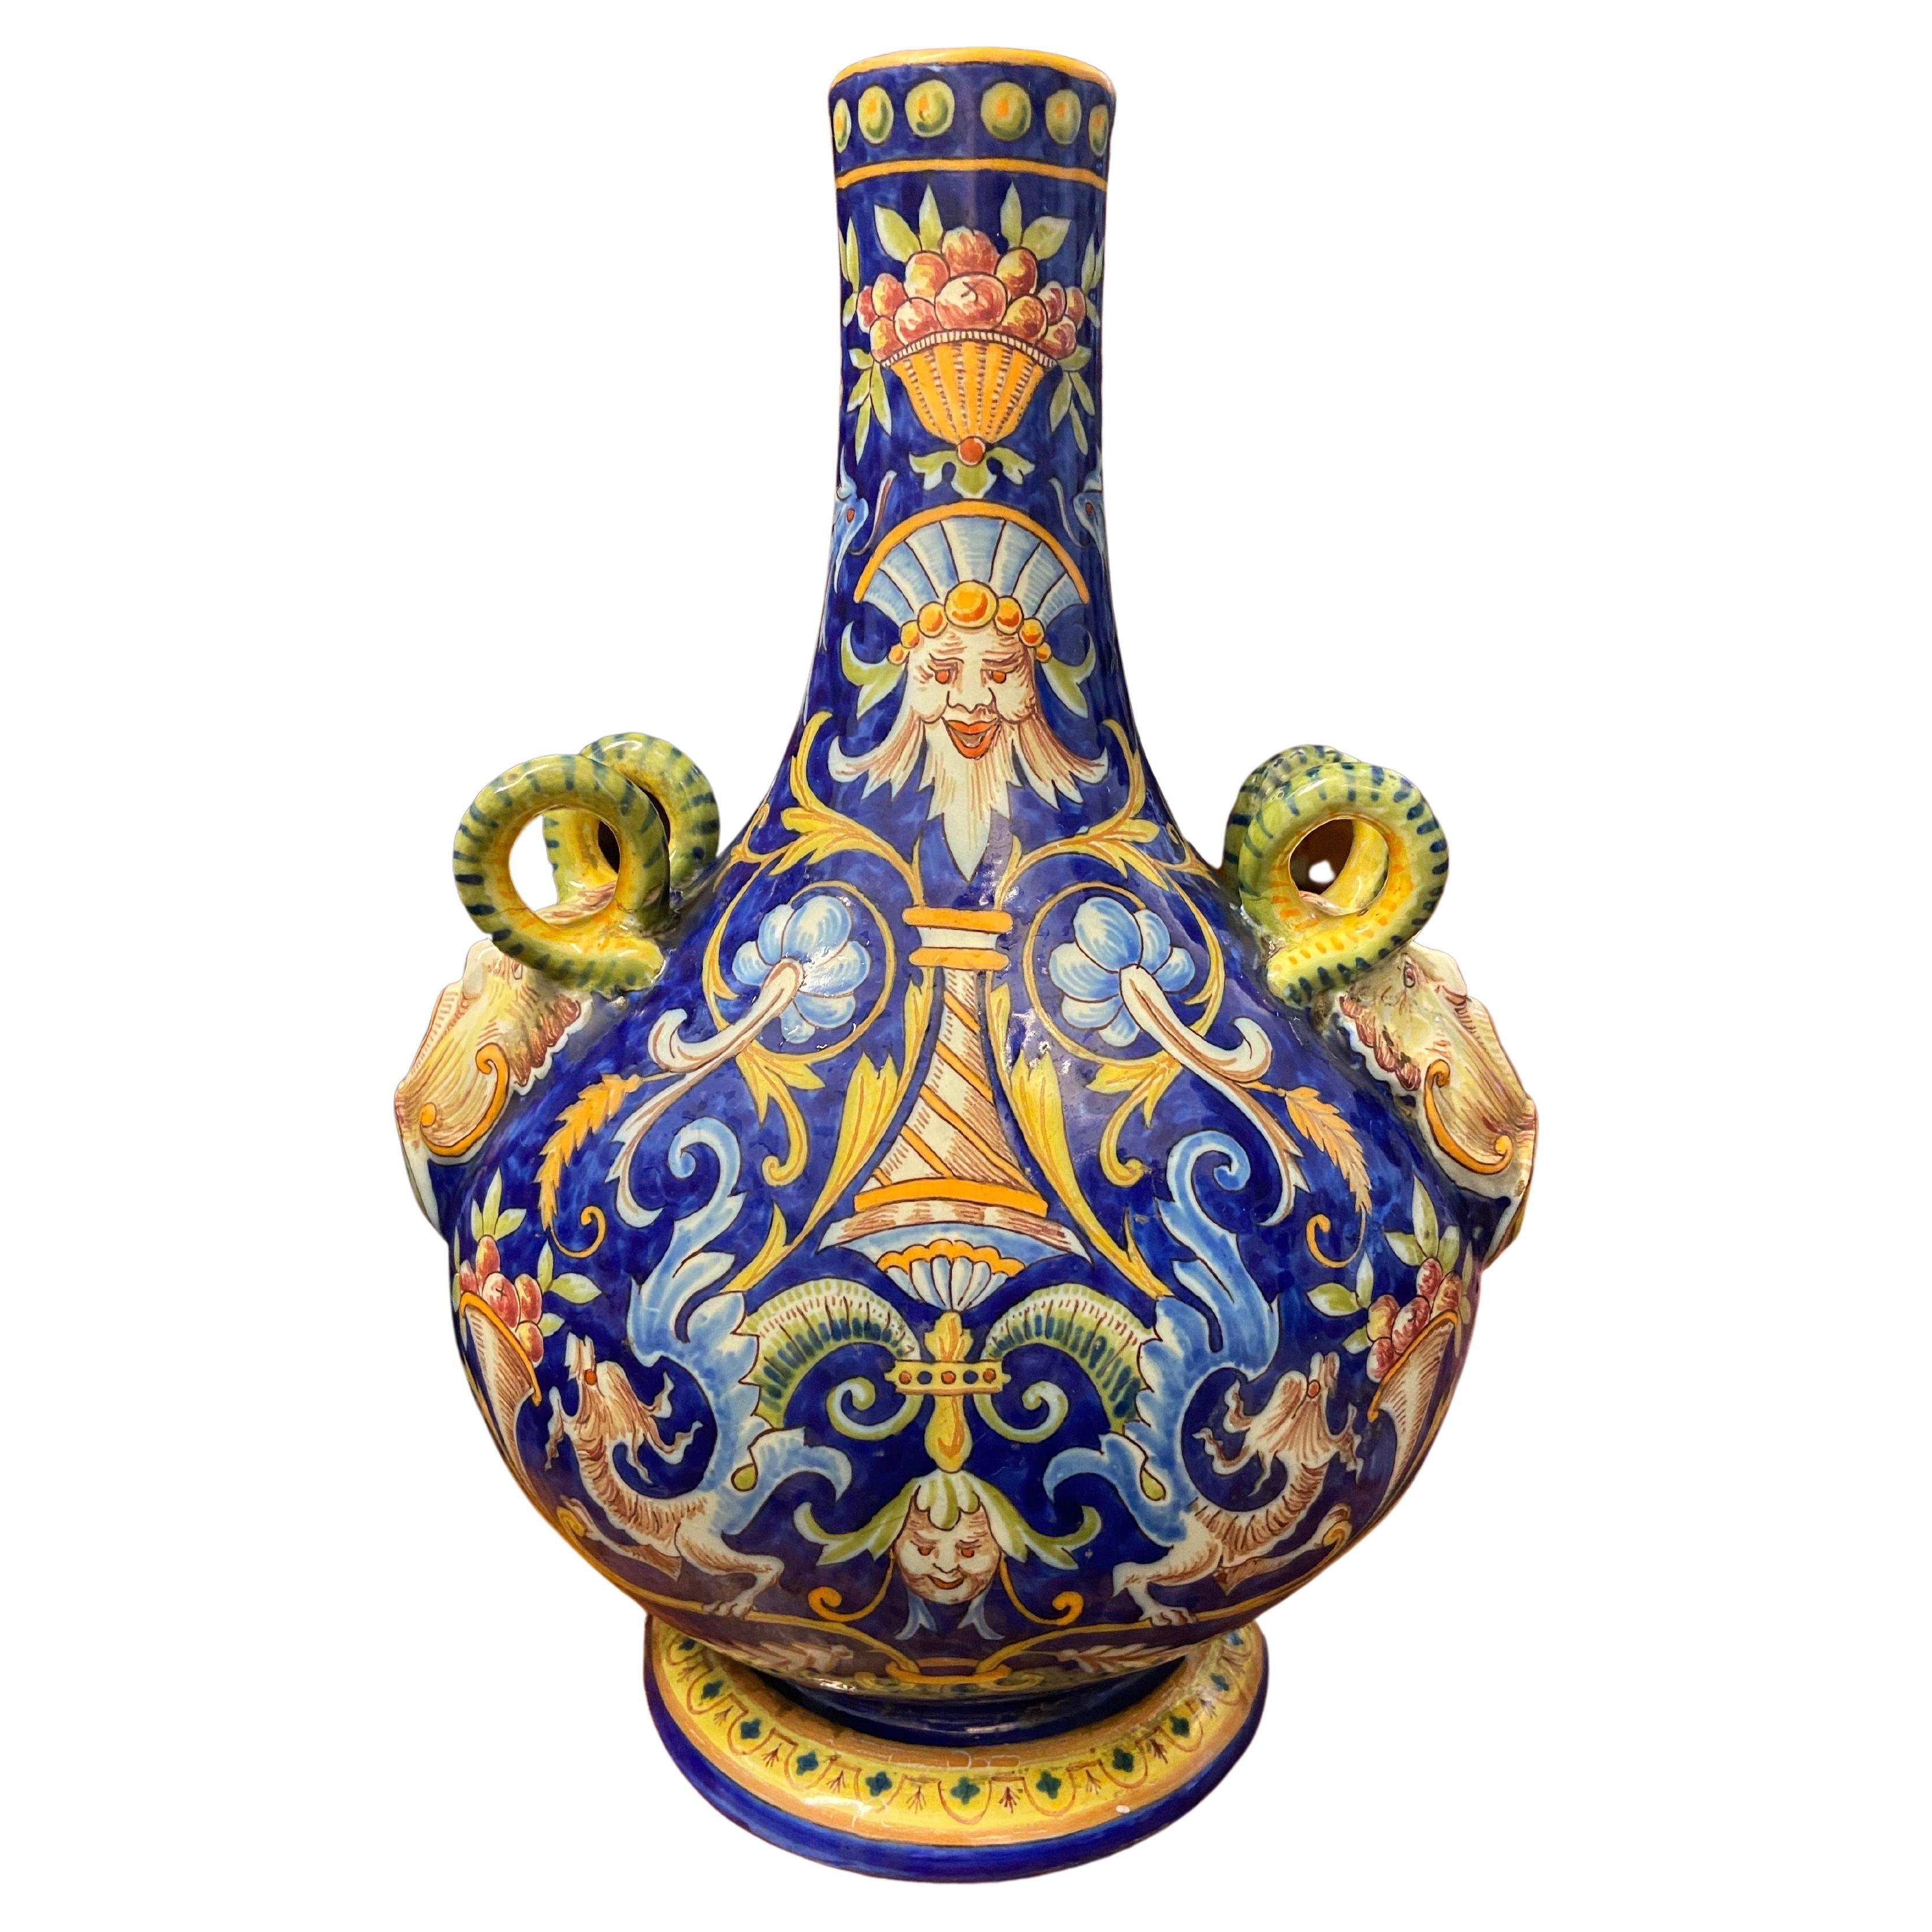 Late 19th Century French Polychromatic Desvres Ceramic Vase or Centrepiece